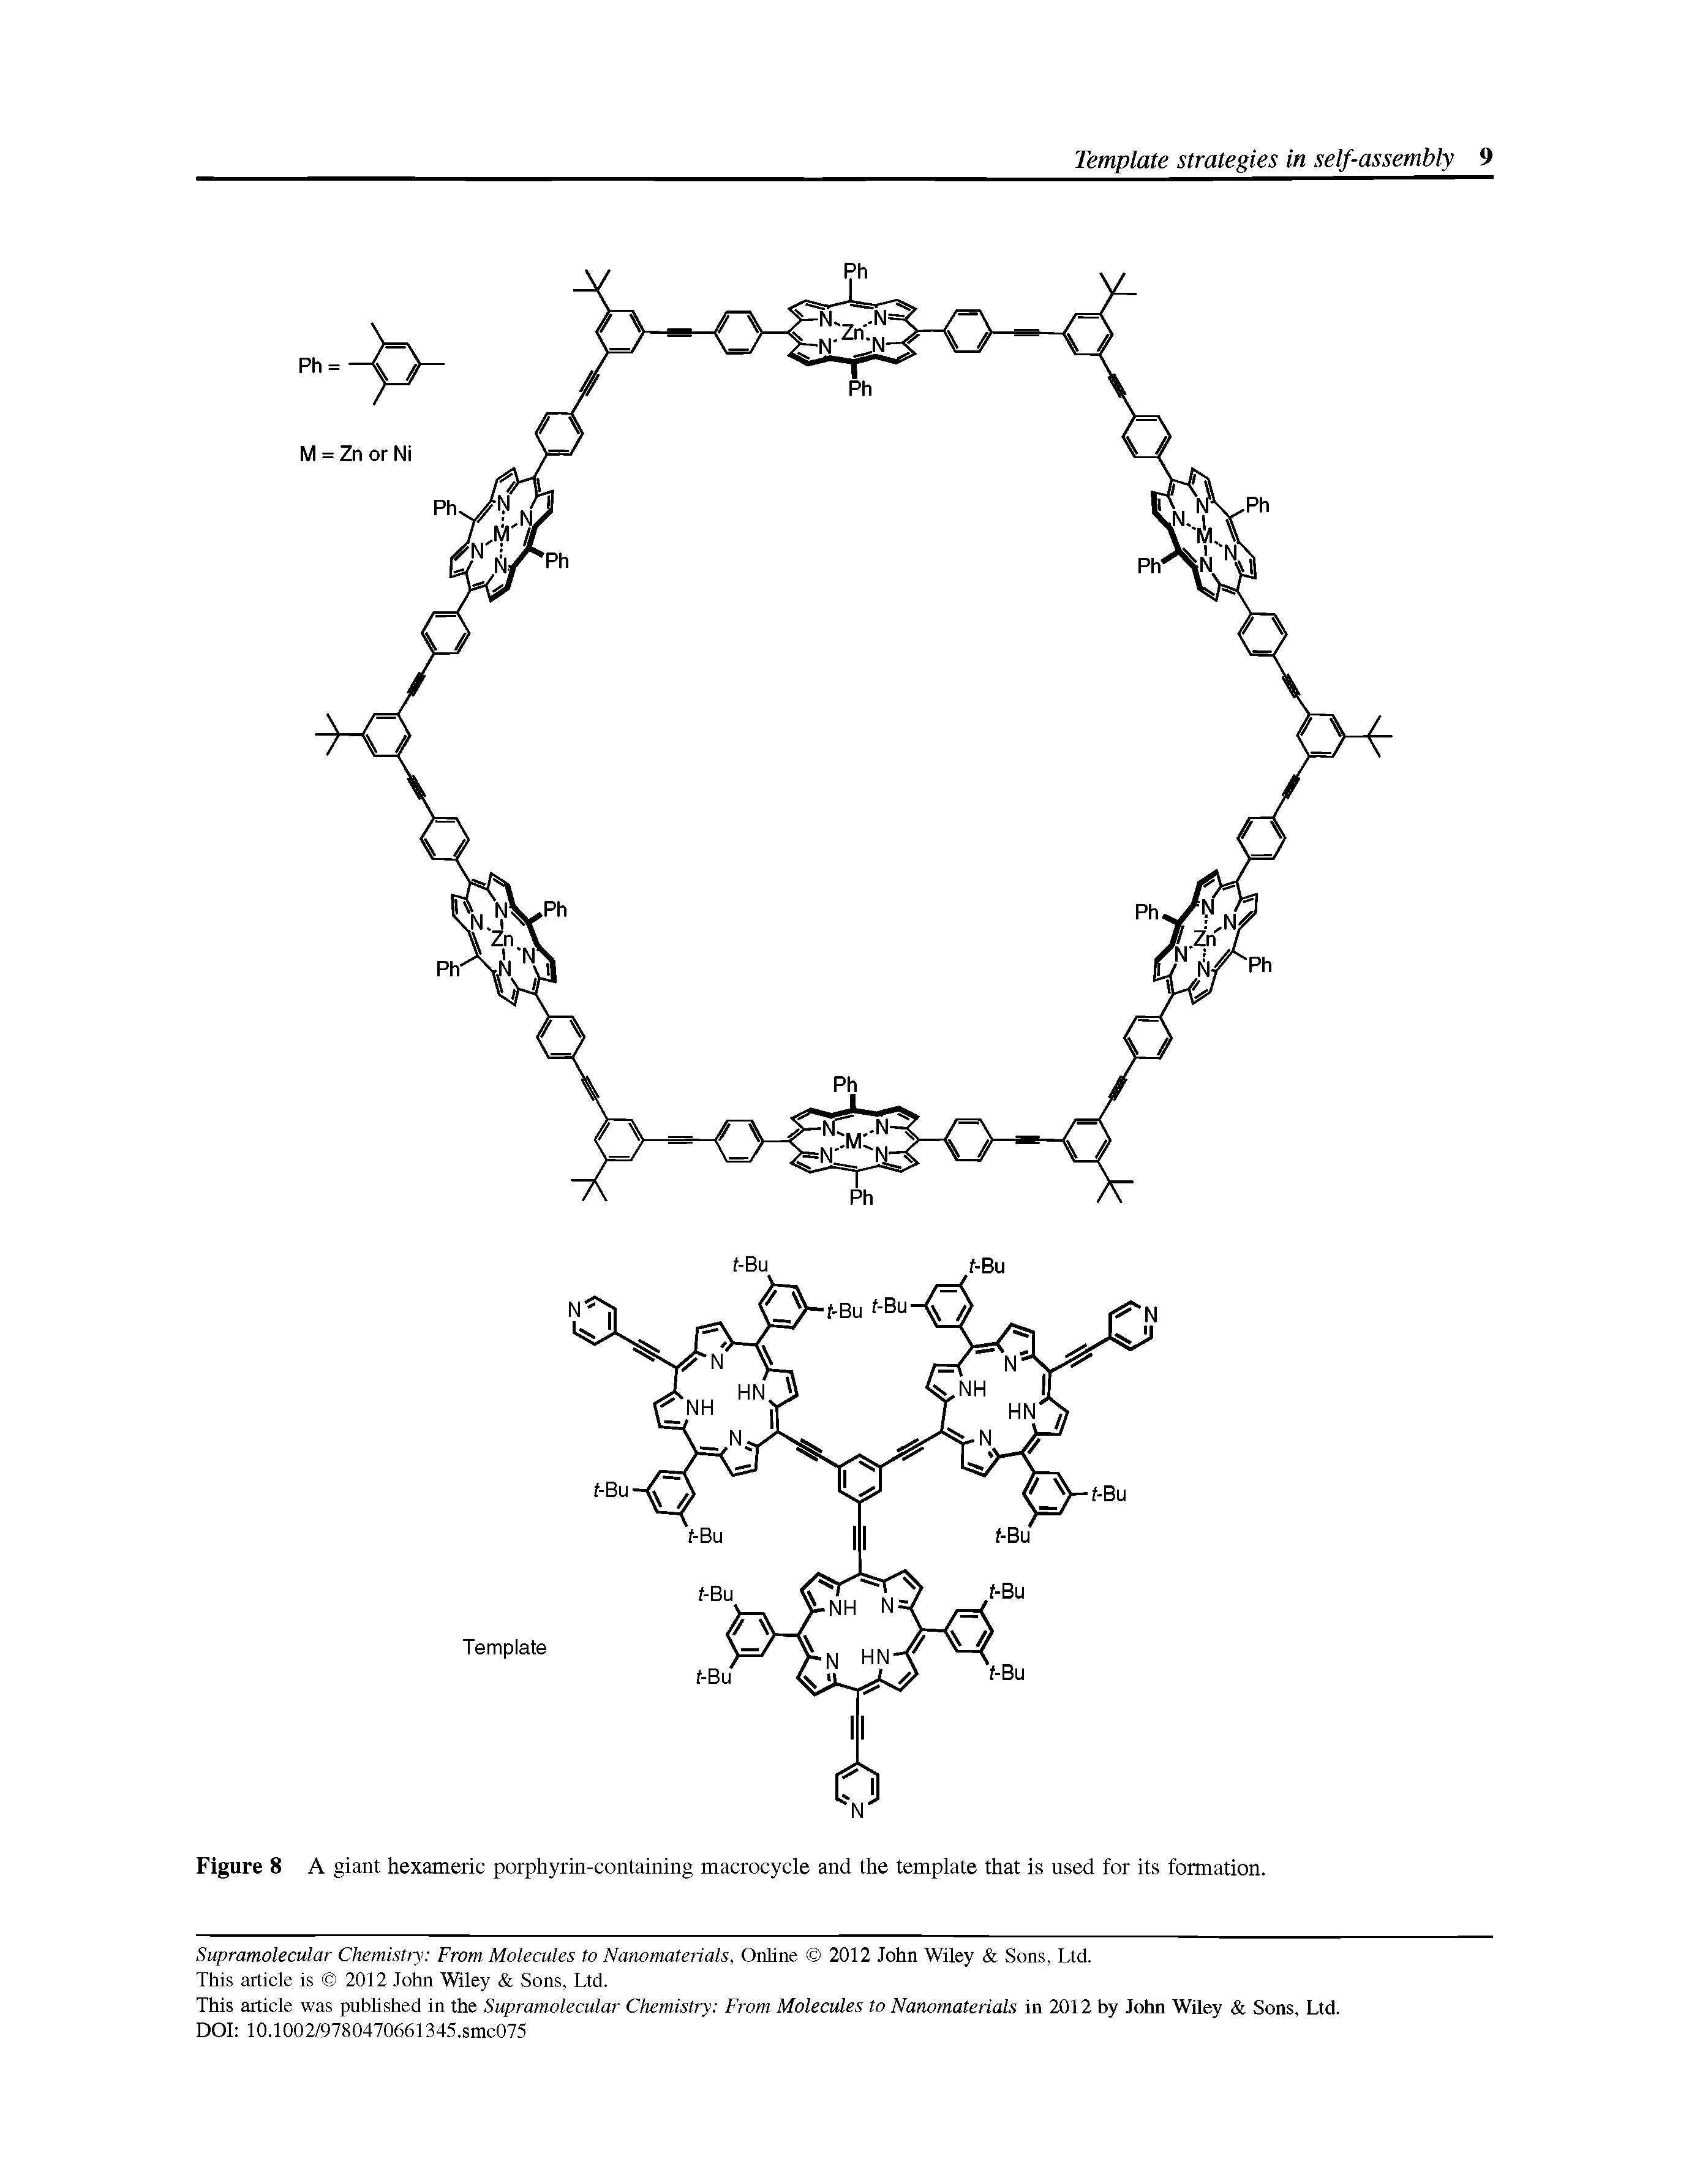 Figure 8 A giant hexameric porphyrin-containing macrocycle and the template that is used for its formation.